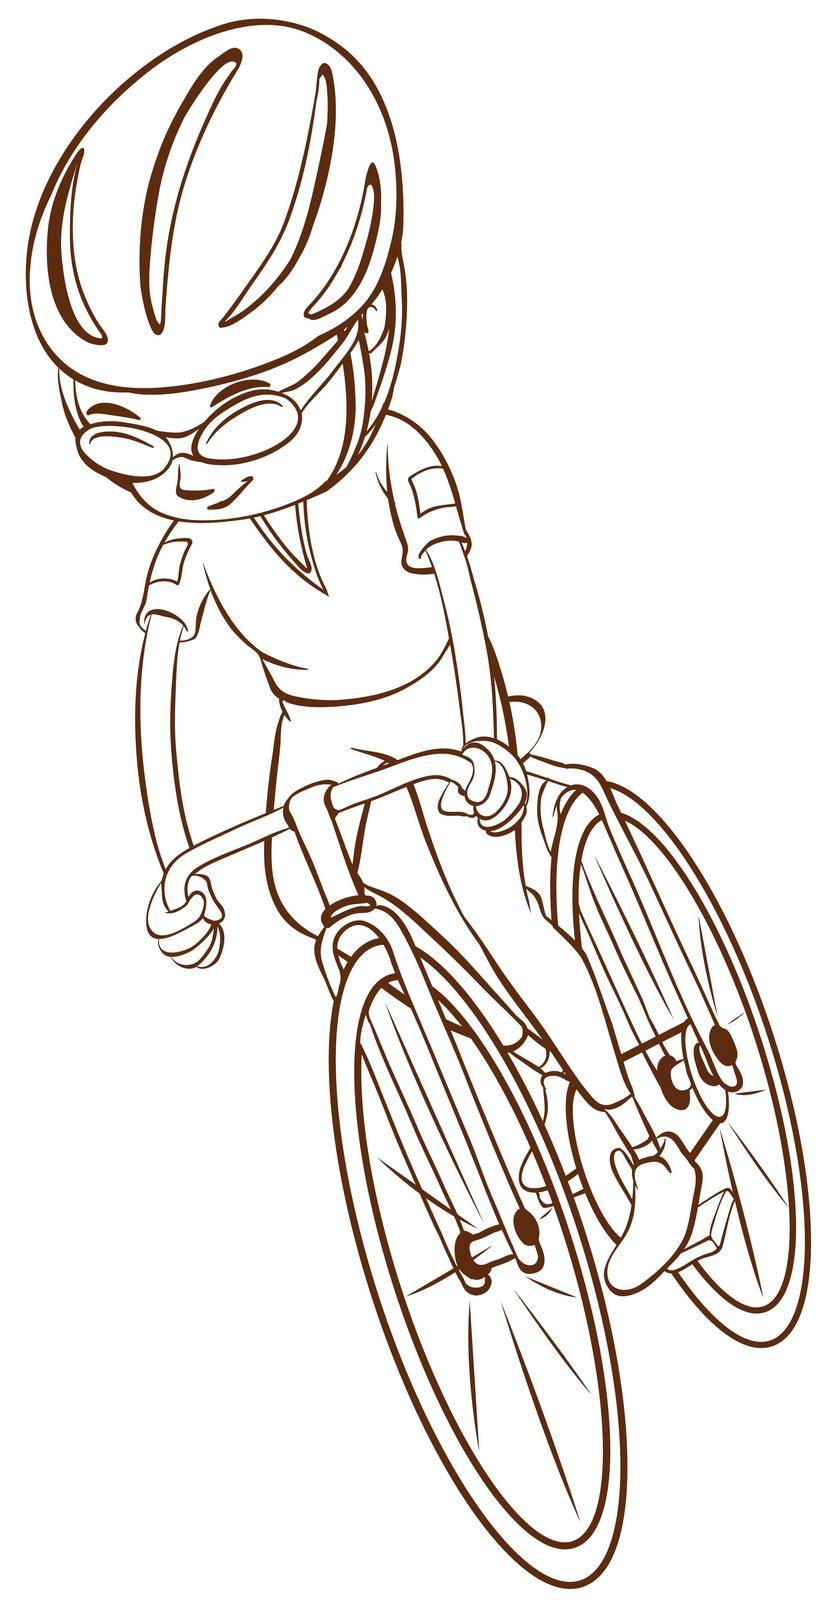 Illustration of a plain sketch of a cyclist on a white background